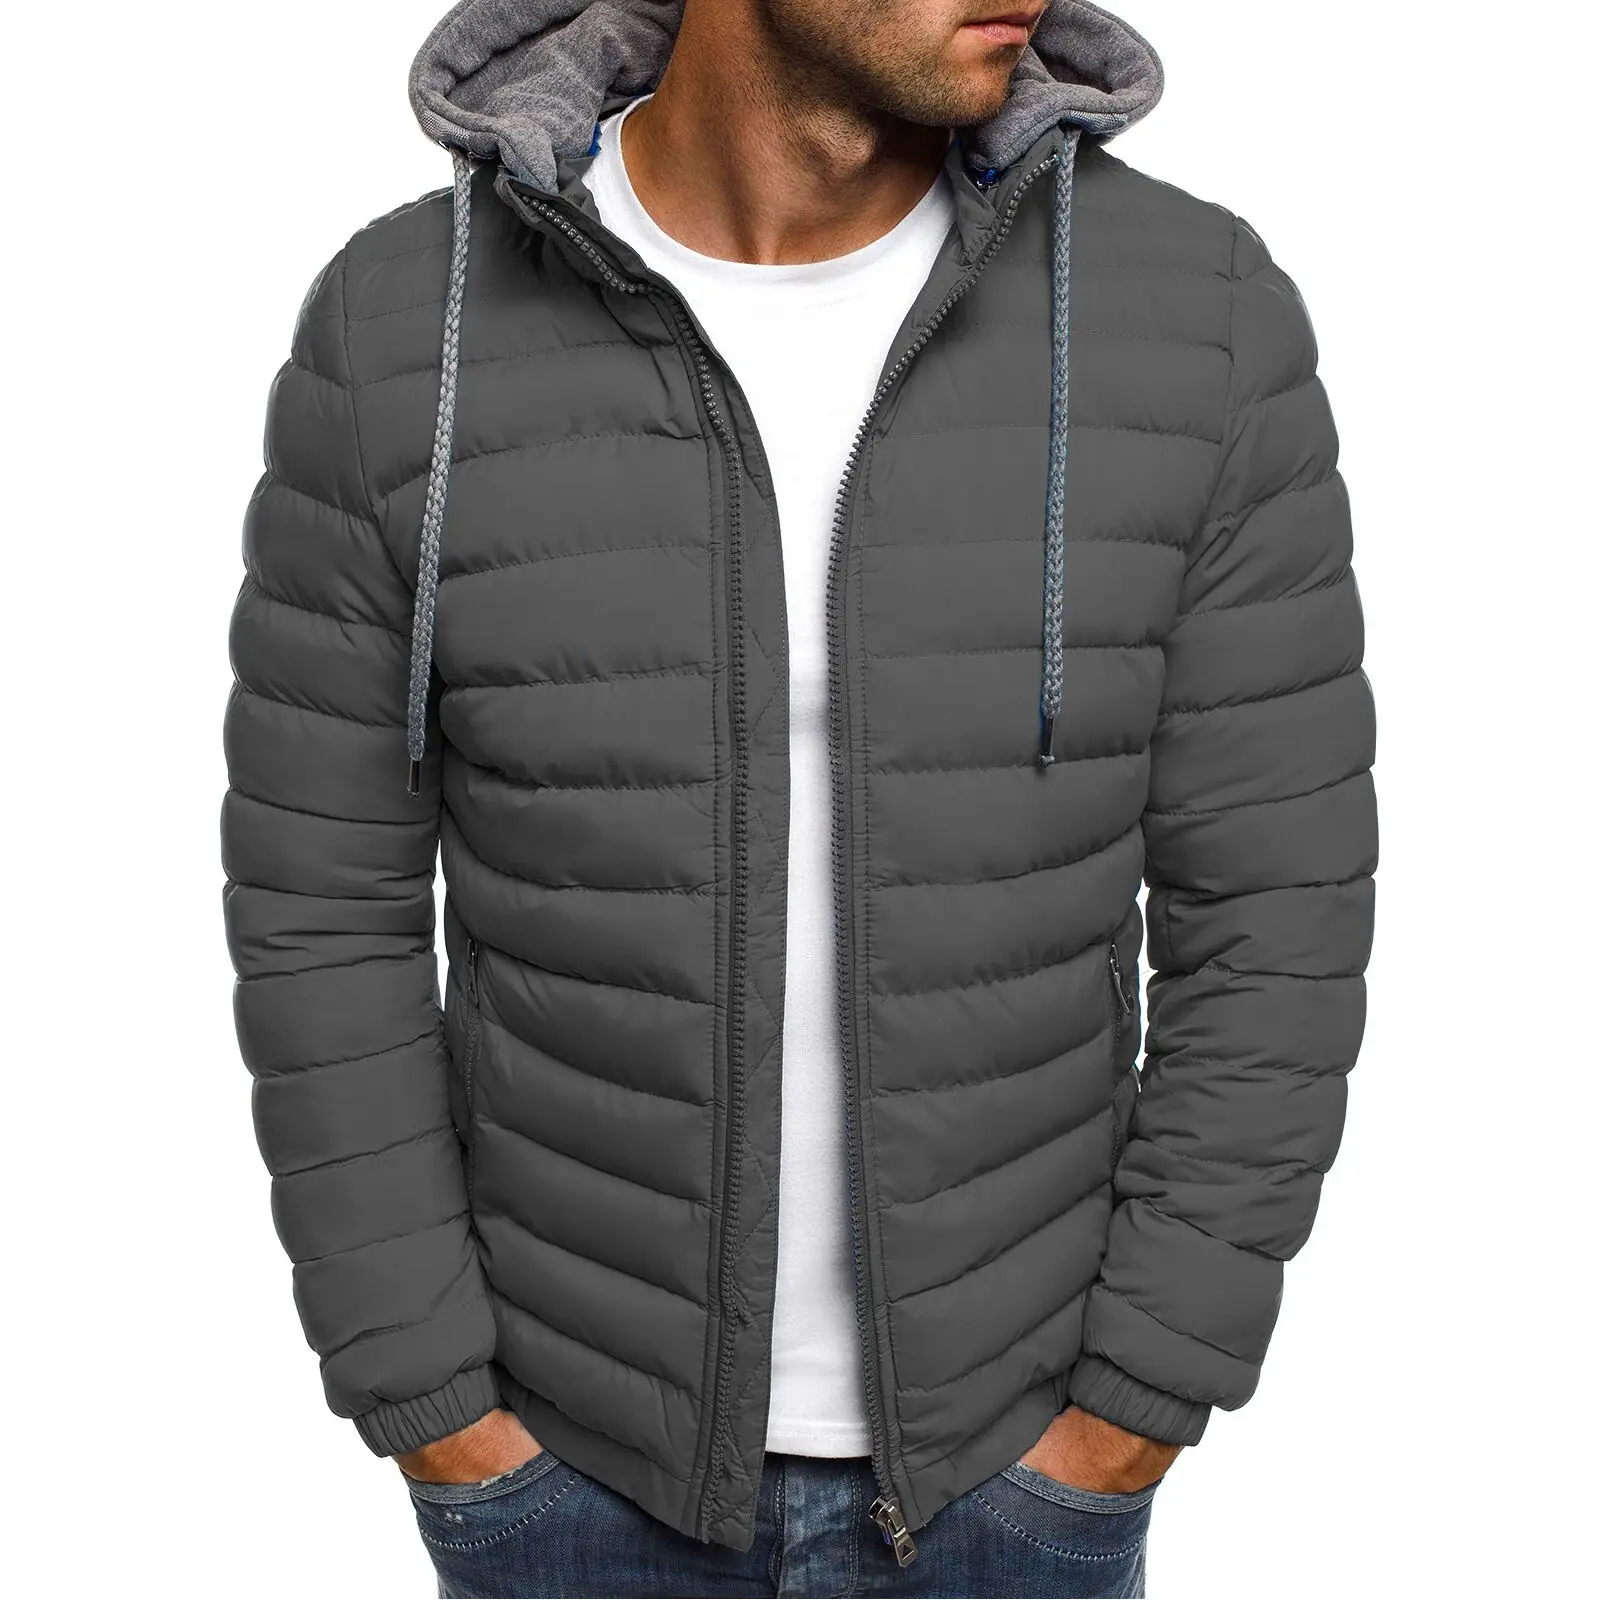 Winter Cotton Men's Down Jacket Hooded Long Sleeve Cardigan Zipper Pockets Solid Thick Fashion Casual Down Jacket black puffer